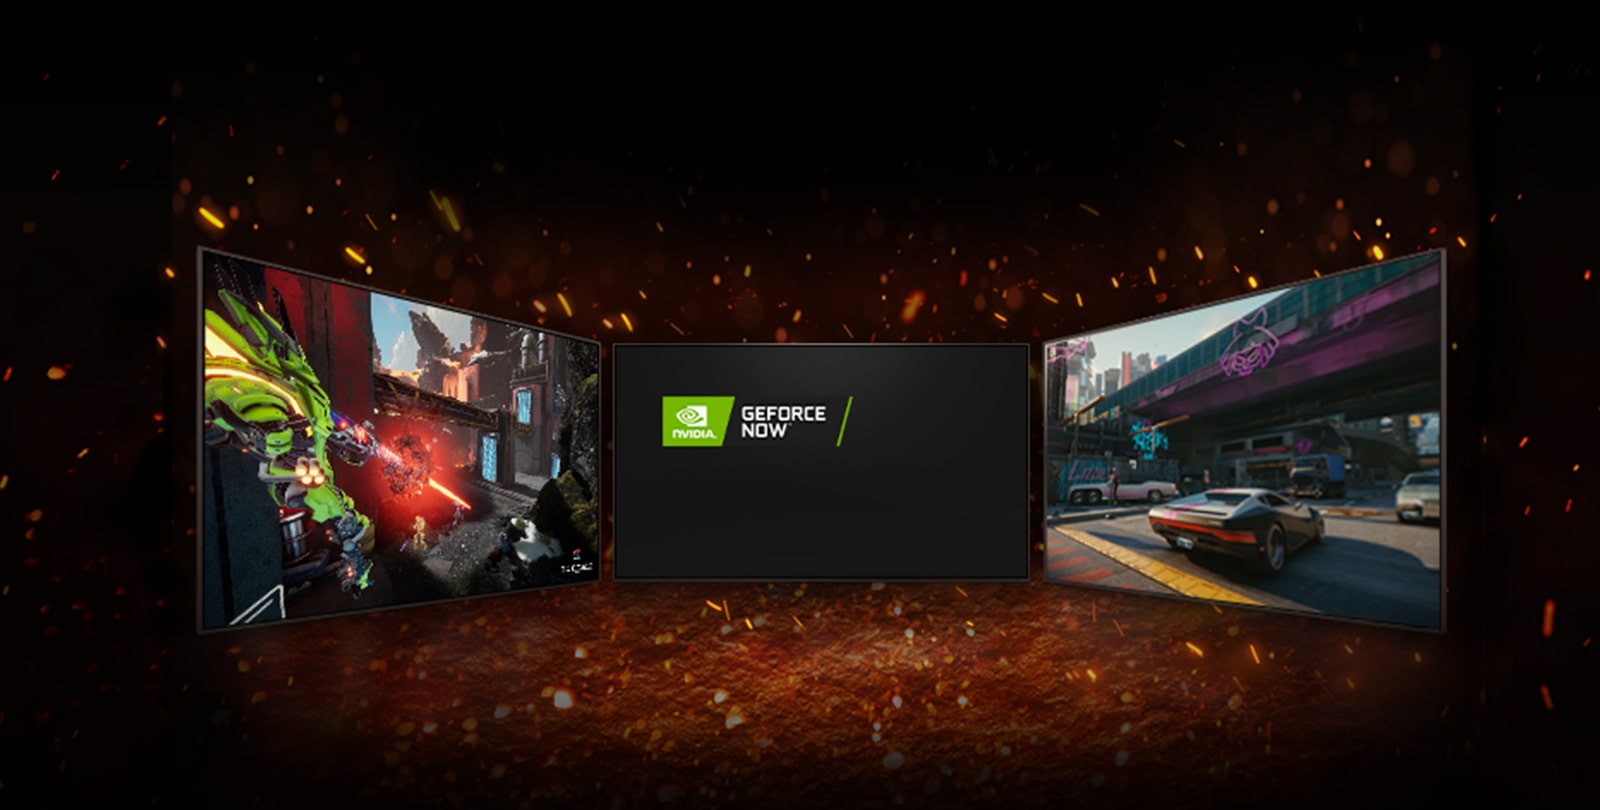 There are three TVs displayed. In the middle, the screen shows two logos placed in diagonal – logo of NVIDIA GeFORCE NOW and logo of STADIA. On left TV shows Splitgate and on right TV shows Cyberpunk 2077. 